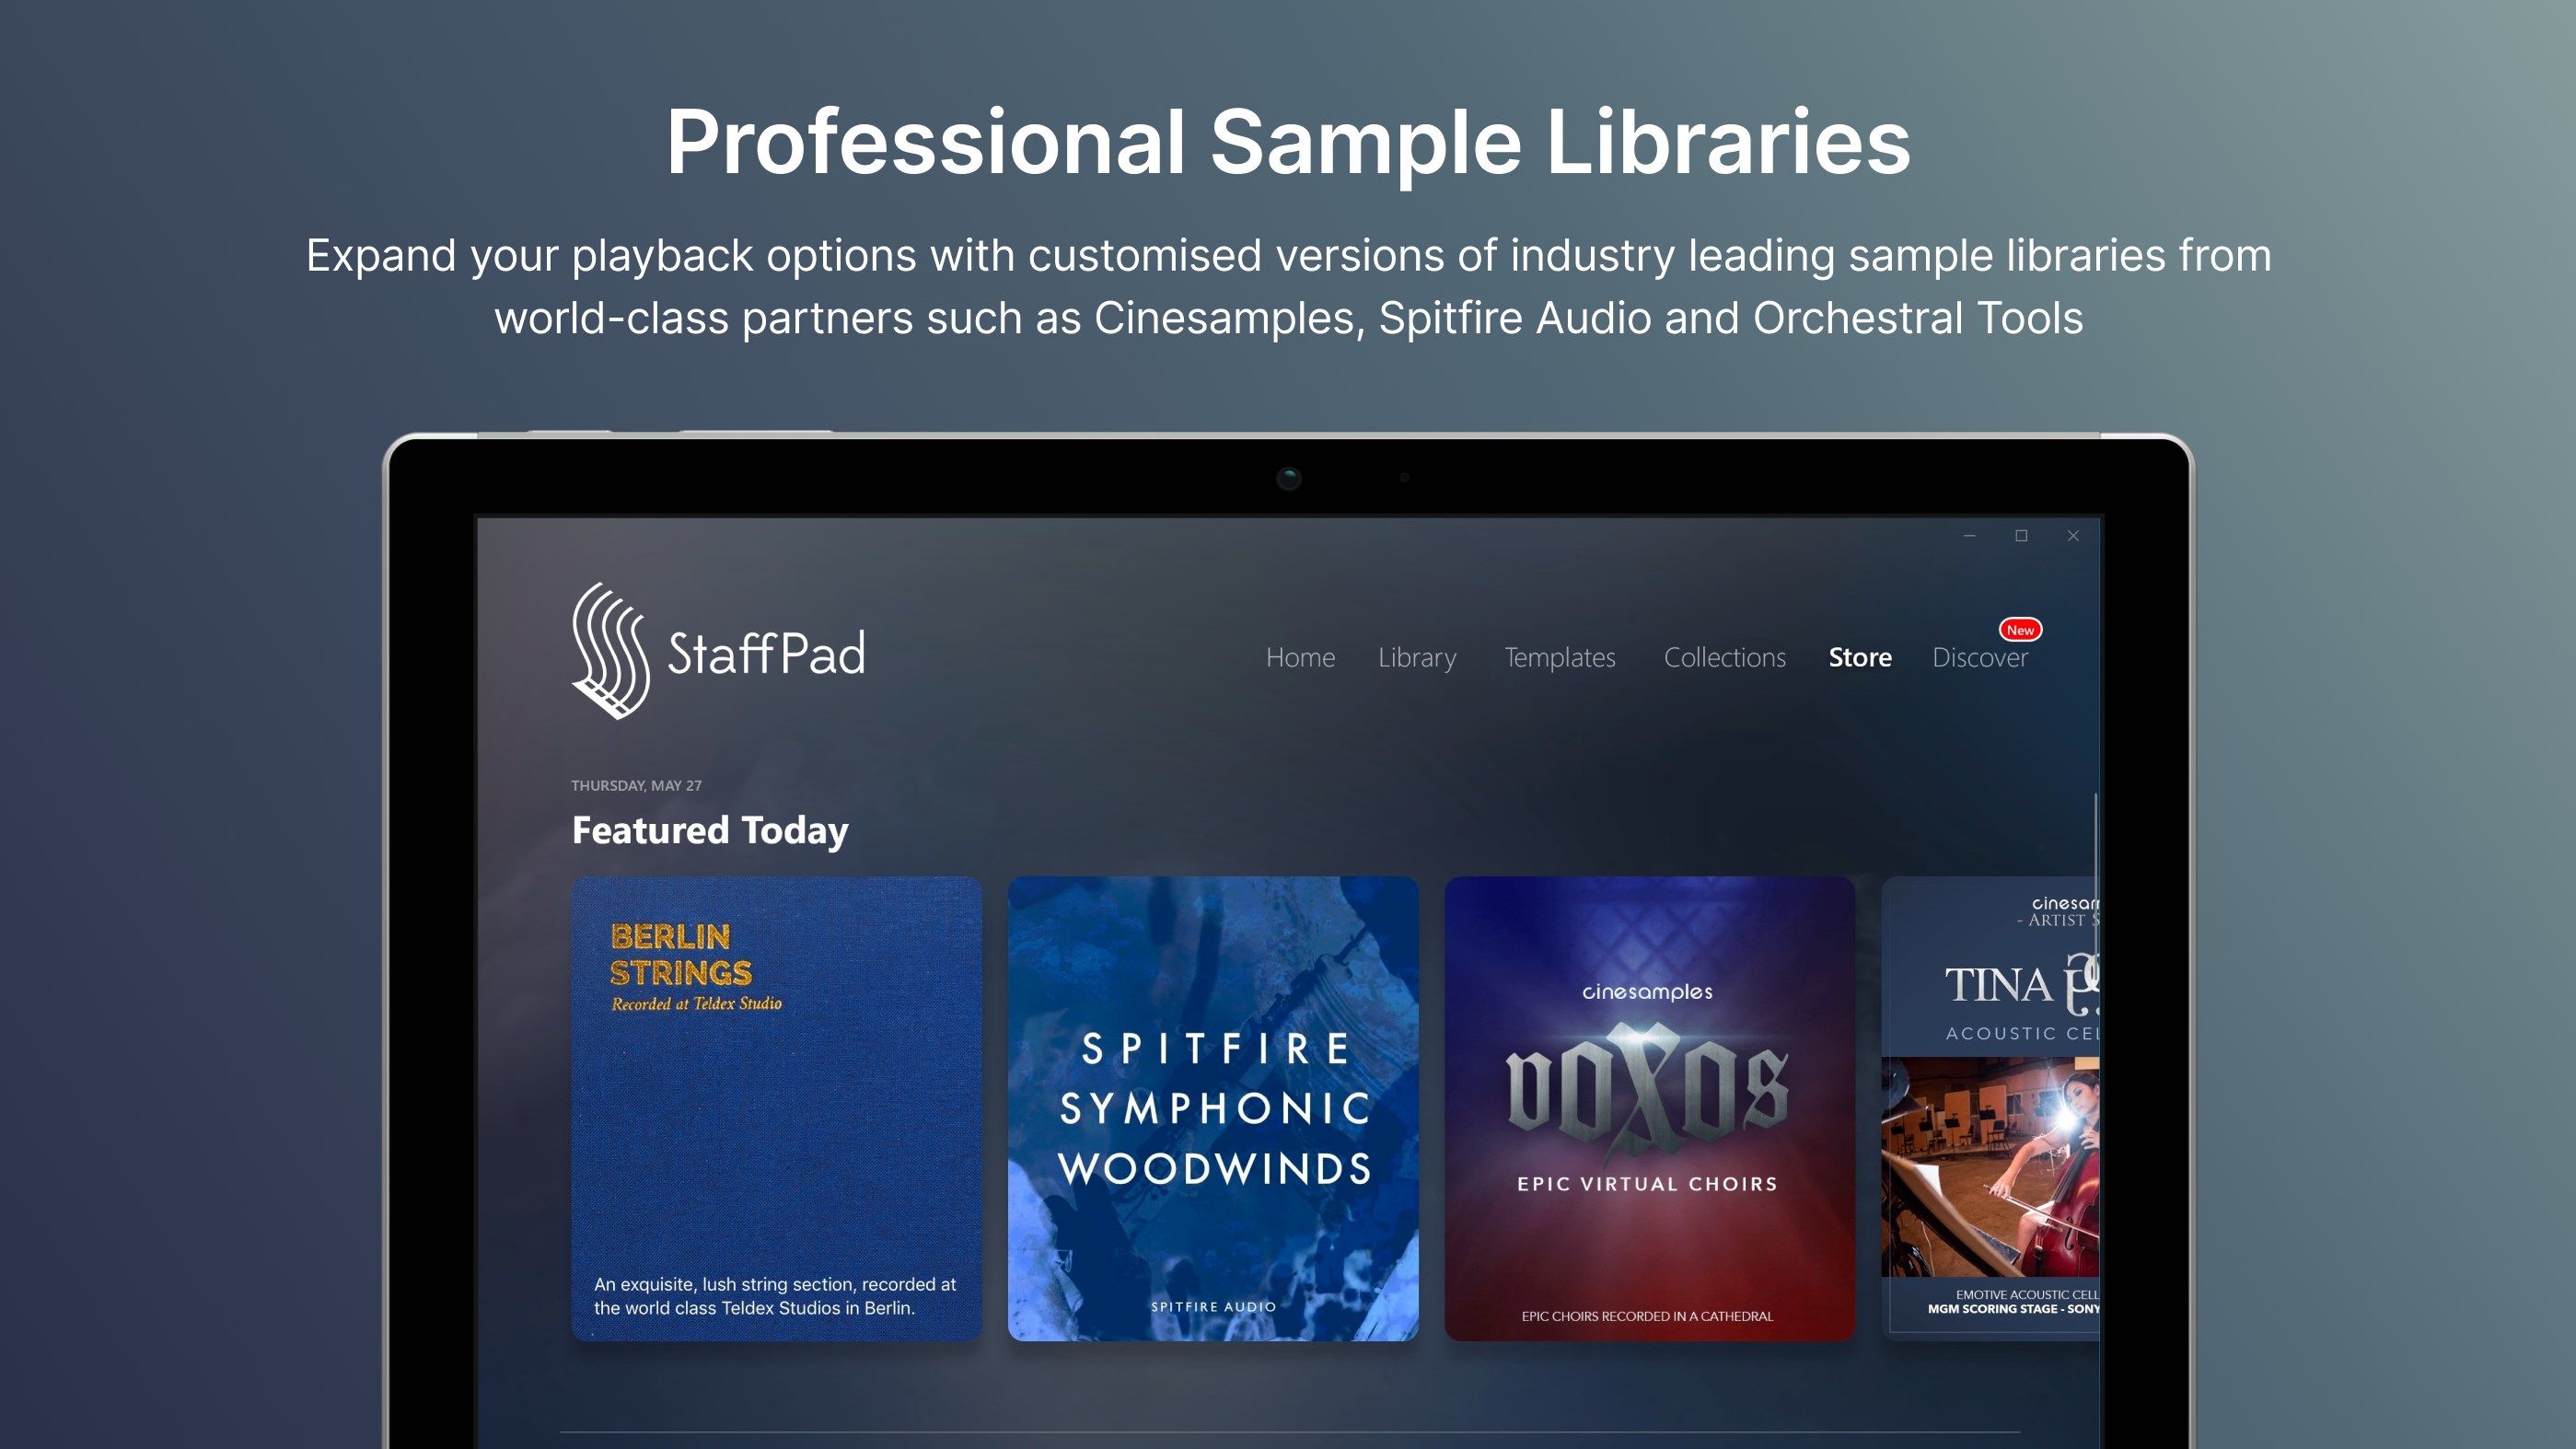 Professional Sample Libraries: Expand your playback options with customised versions of industry leading sample libraries from world-class partners such as Cinesamples, Spitfire Audio and Orchestral Tools